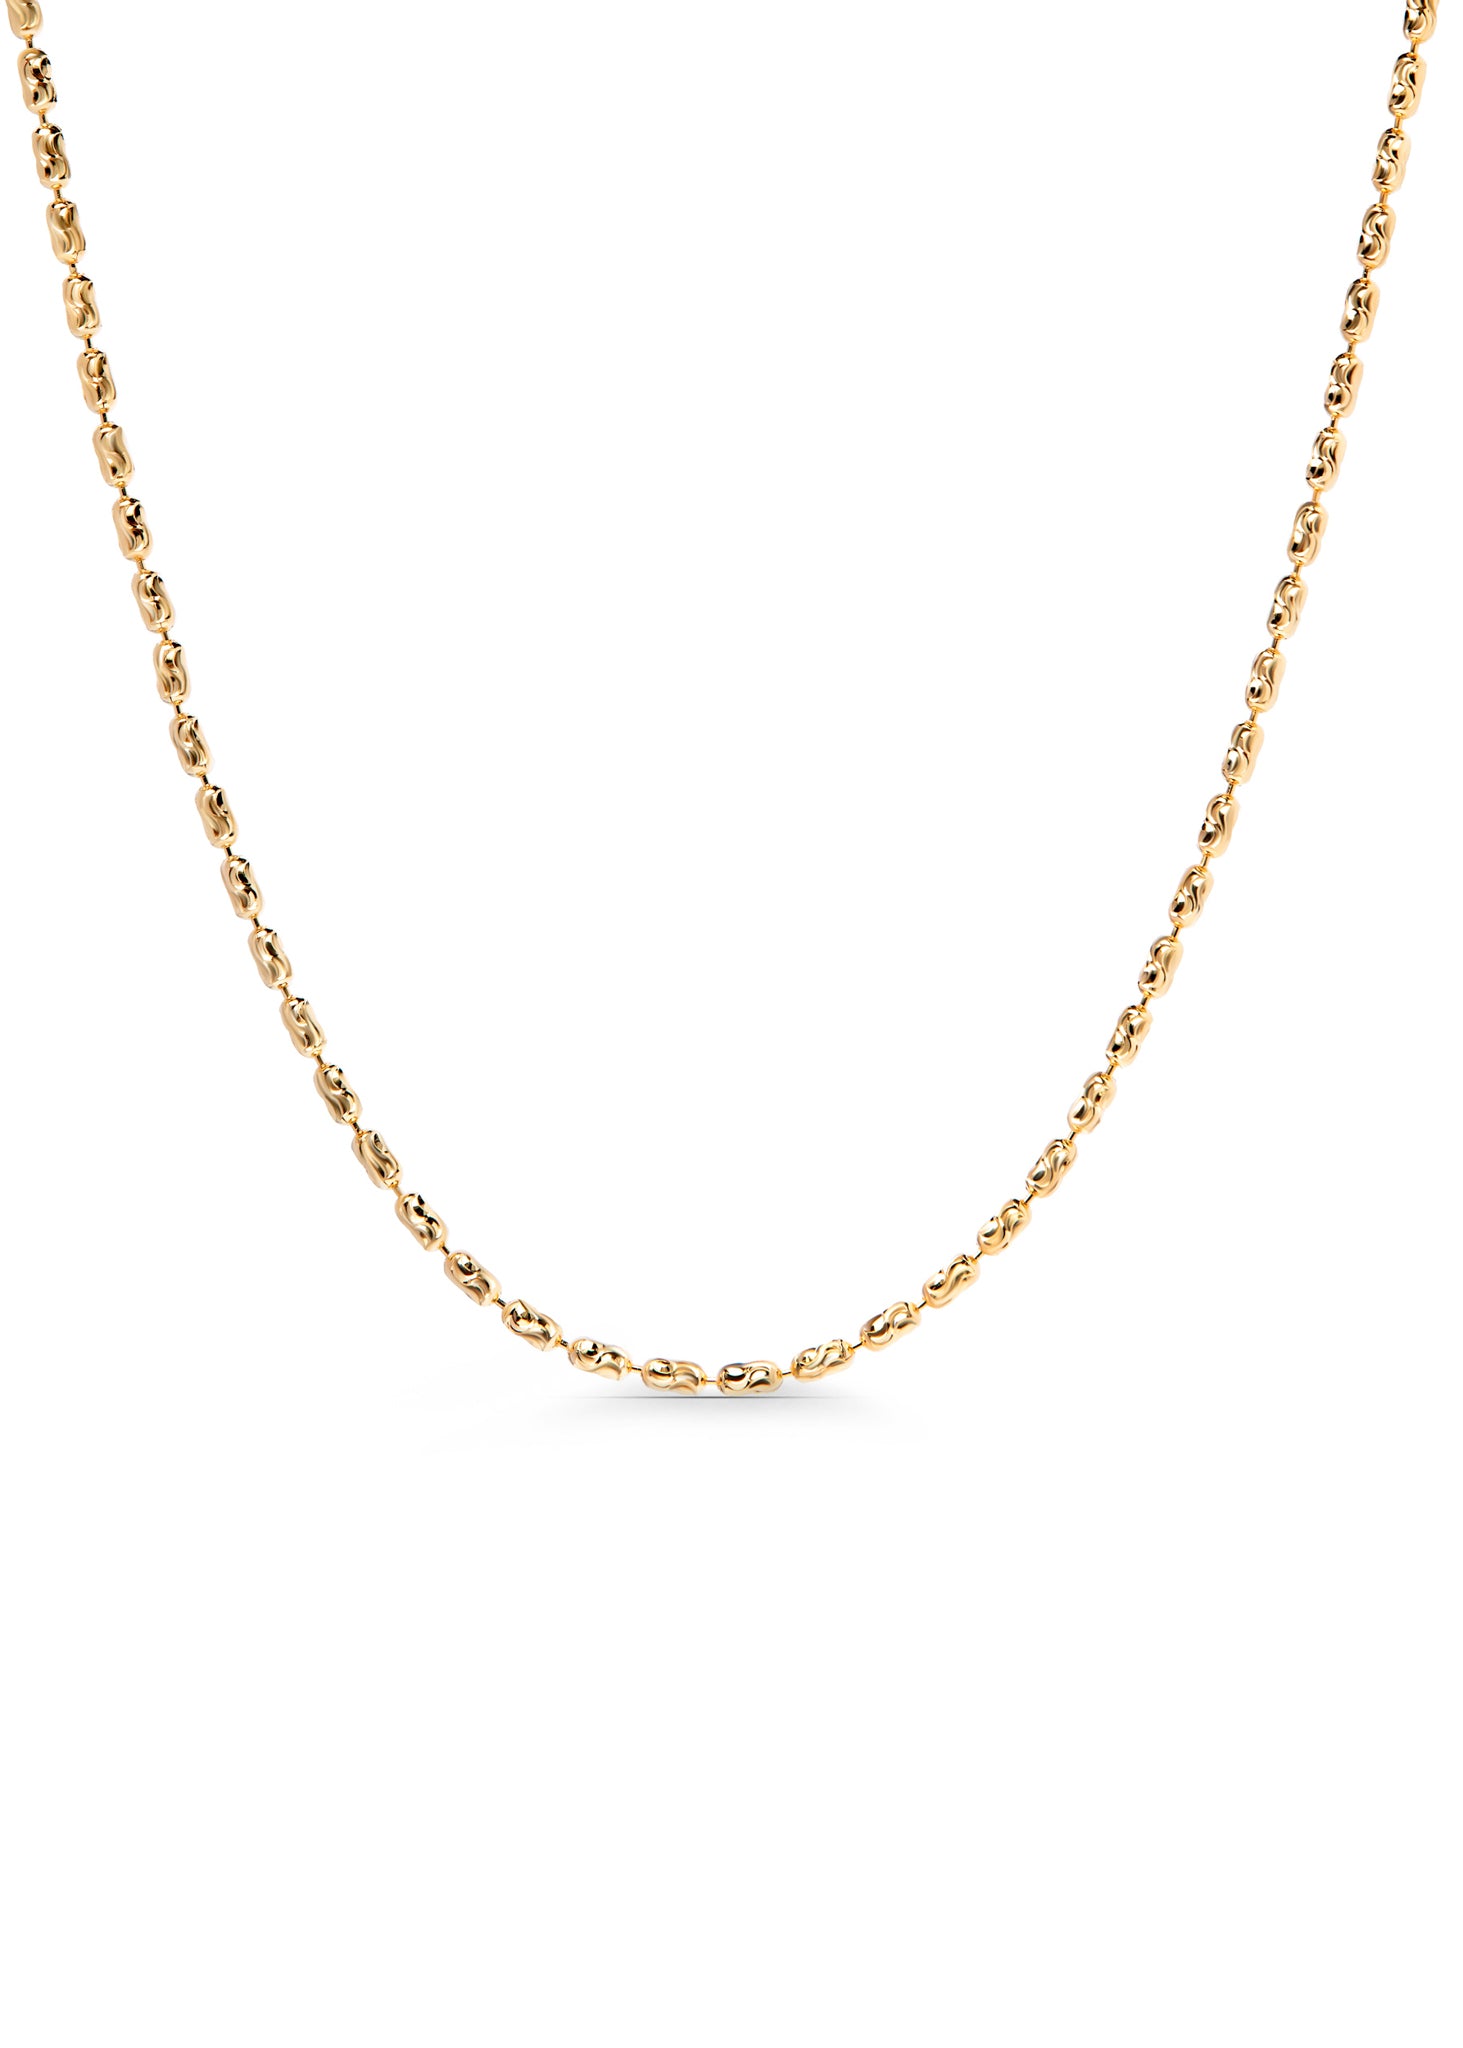 Gold droplets chain